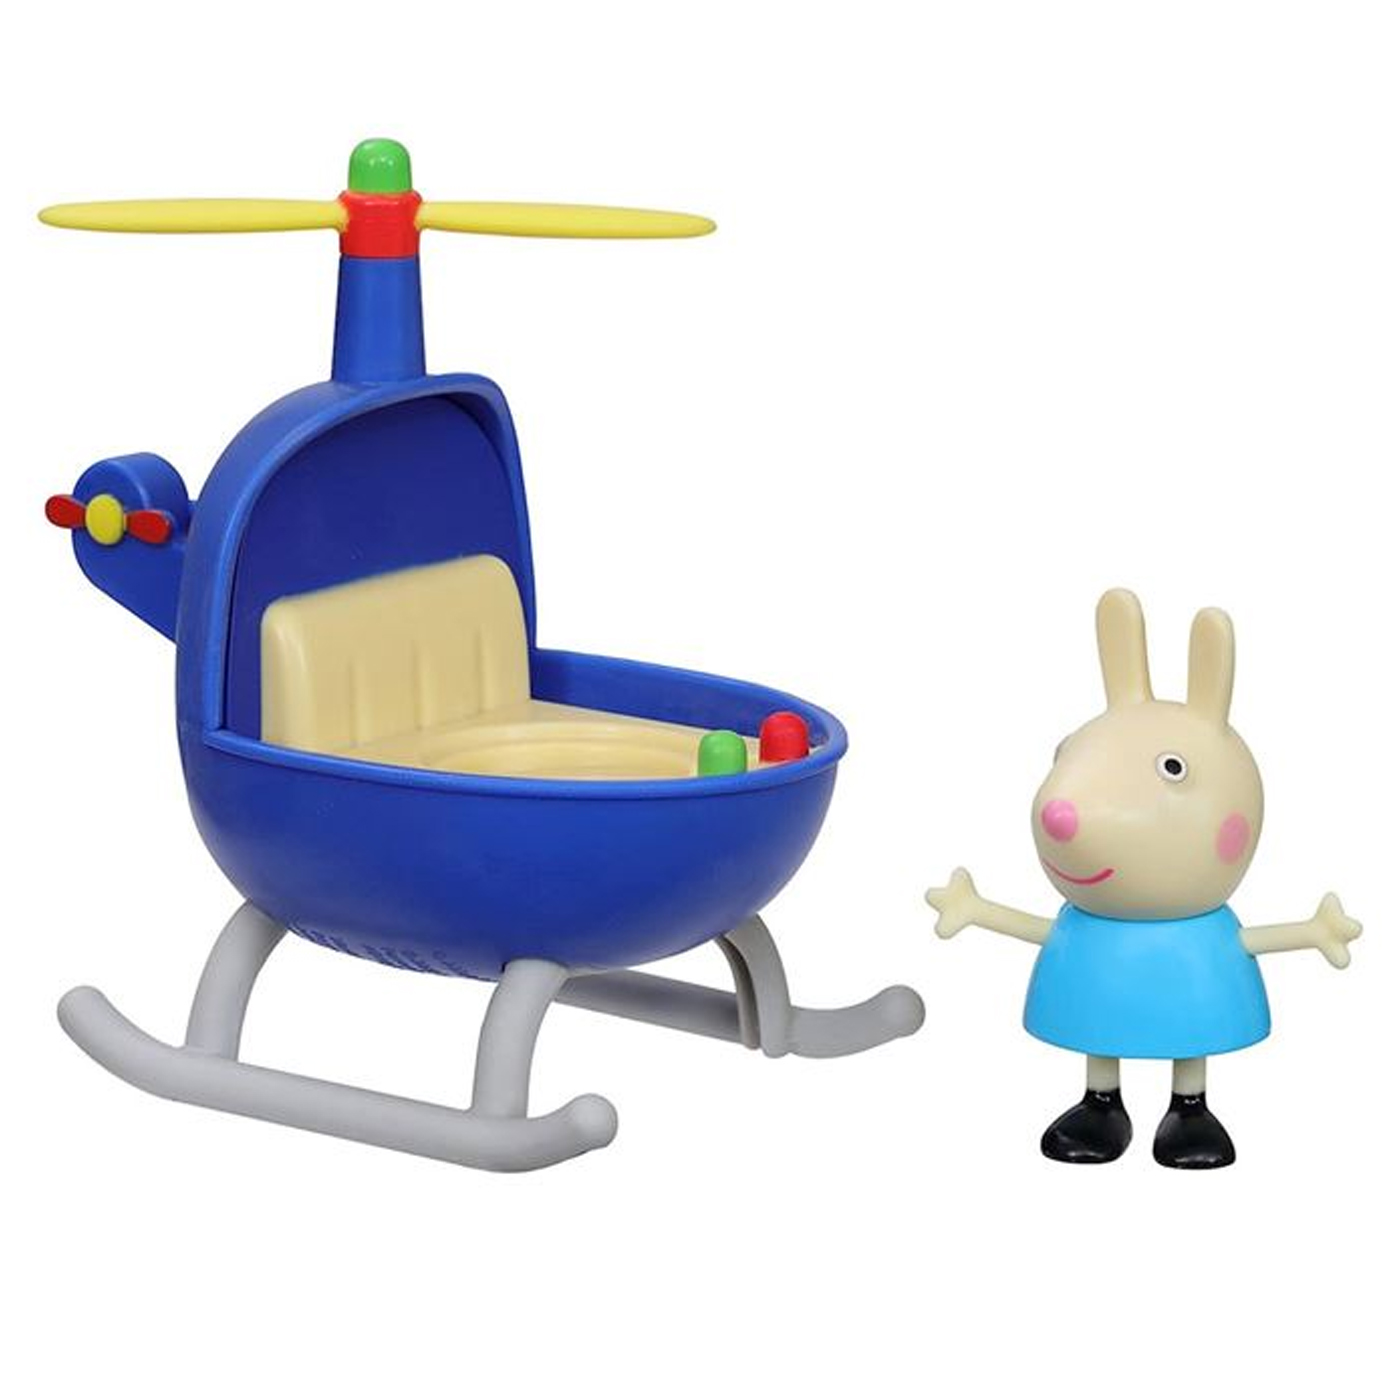 HASBRO GAMES Peppa Pig Little Helicopter